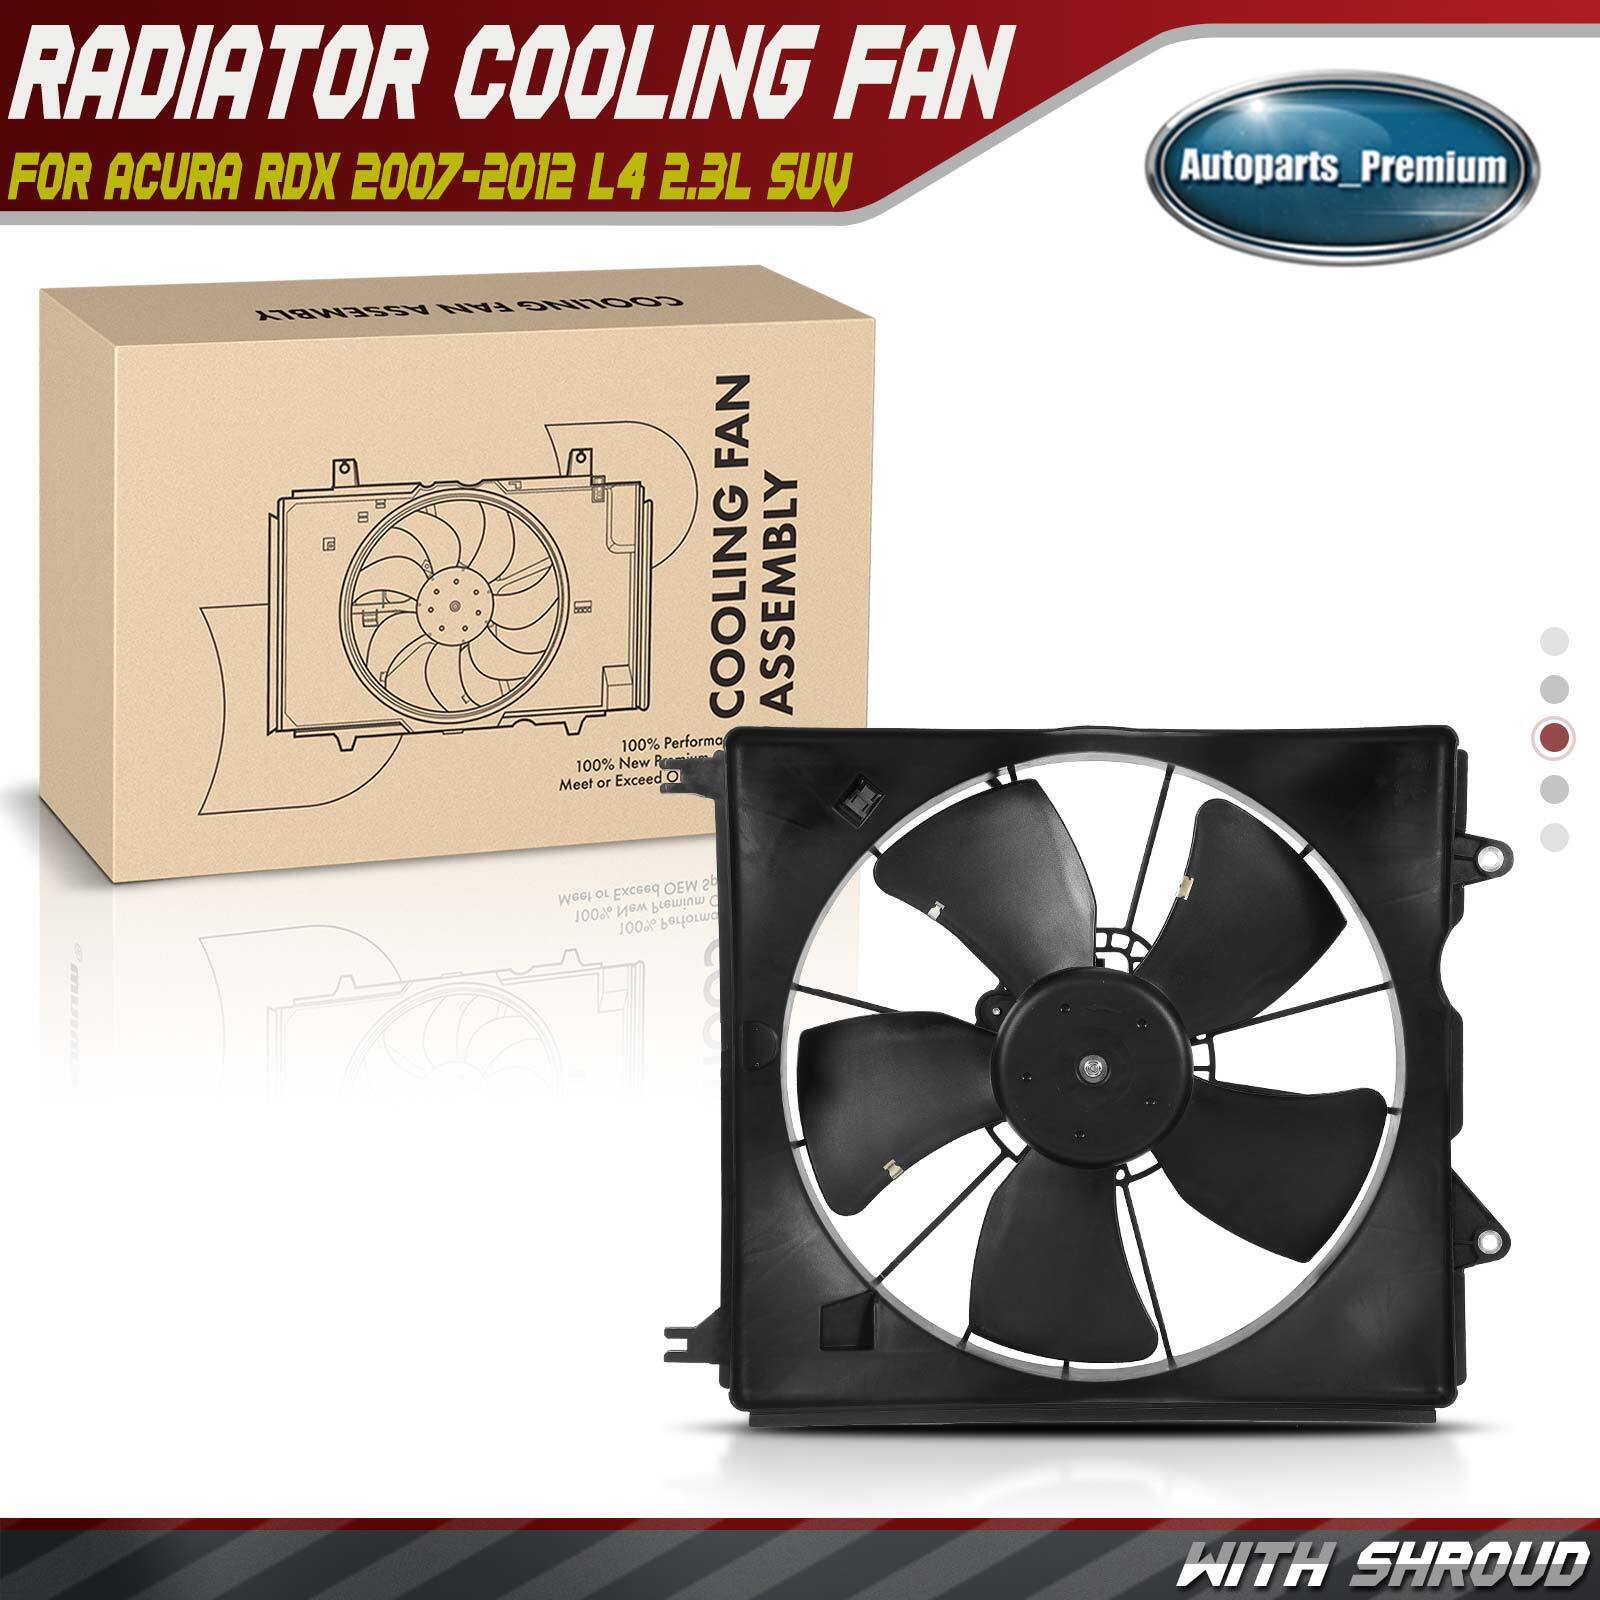 New Radiator Cooling Fan Assembly with Motor for Acura RDX 2007-2012 L4 2.3L SUV